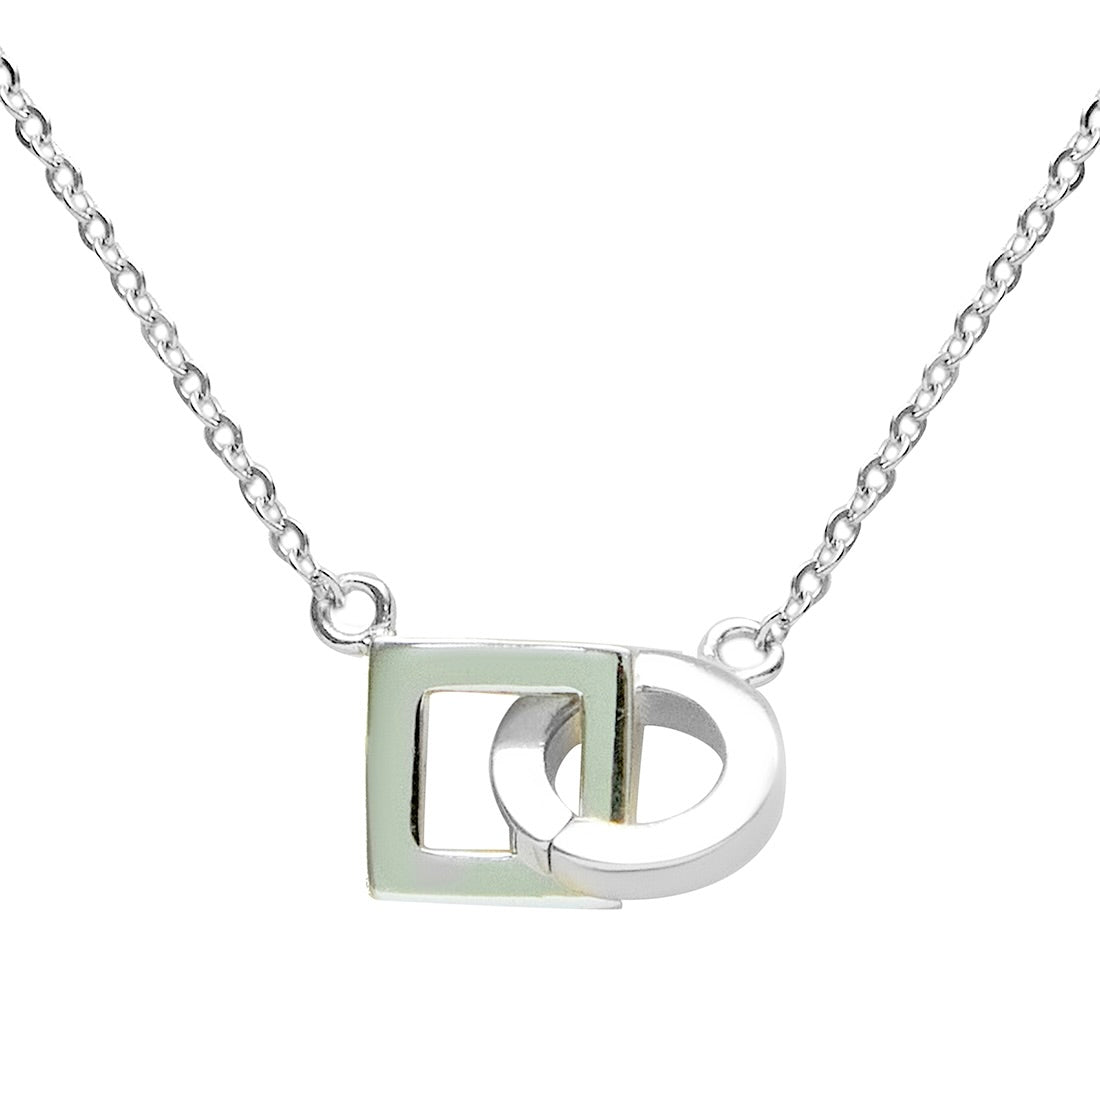 Silver Round Square Necklace